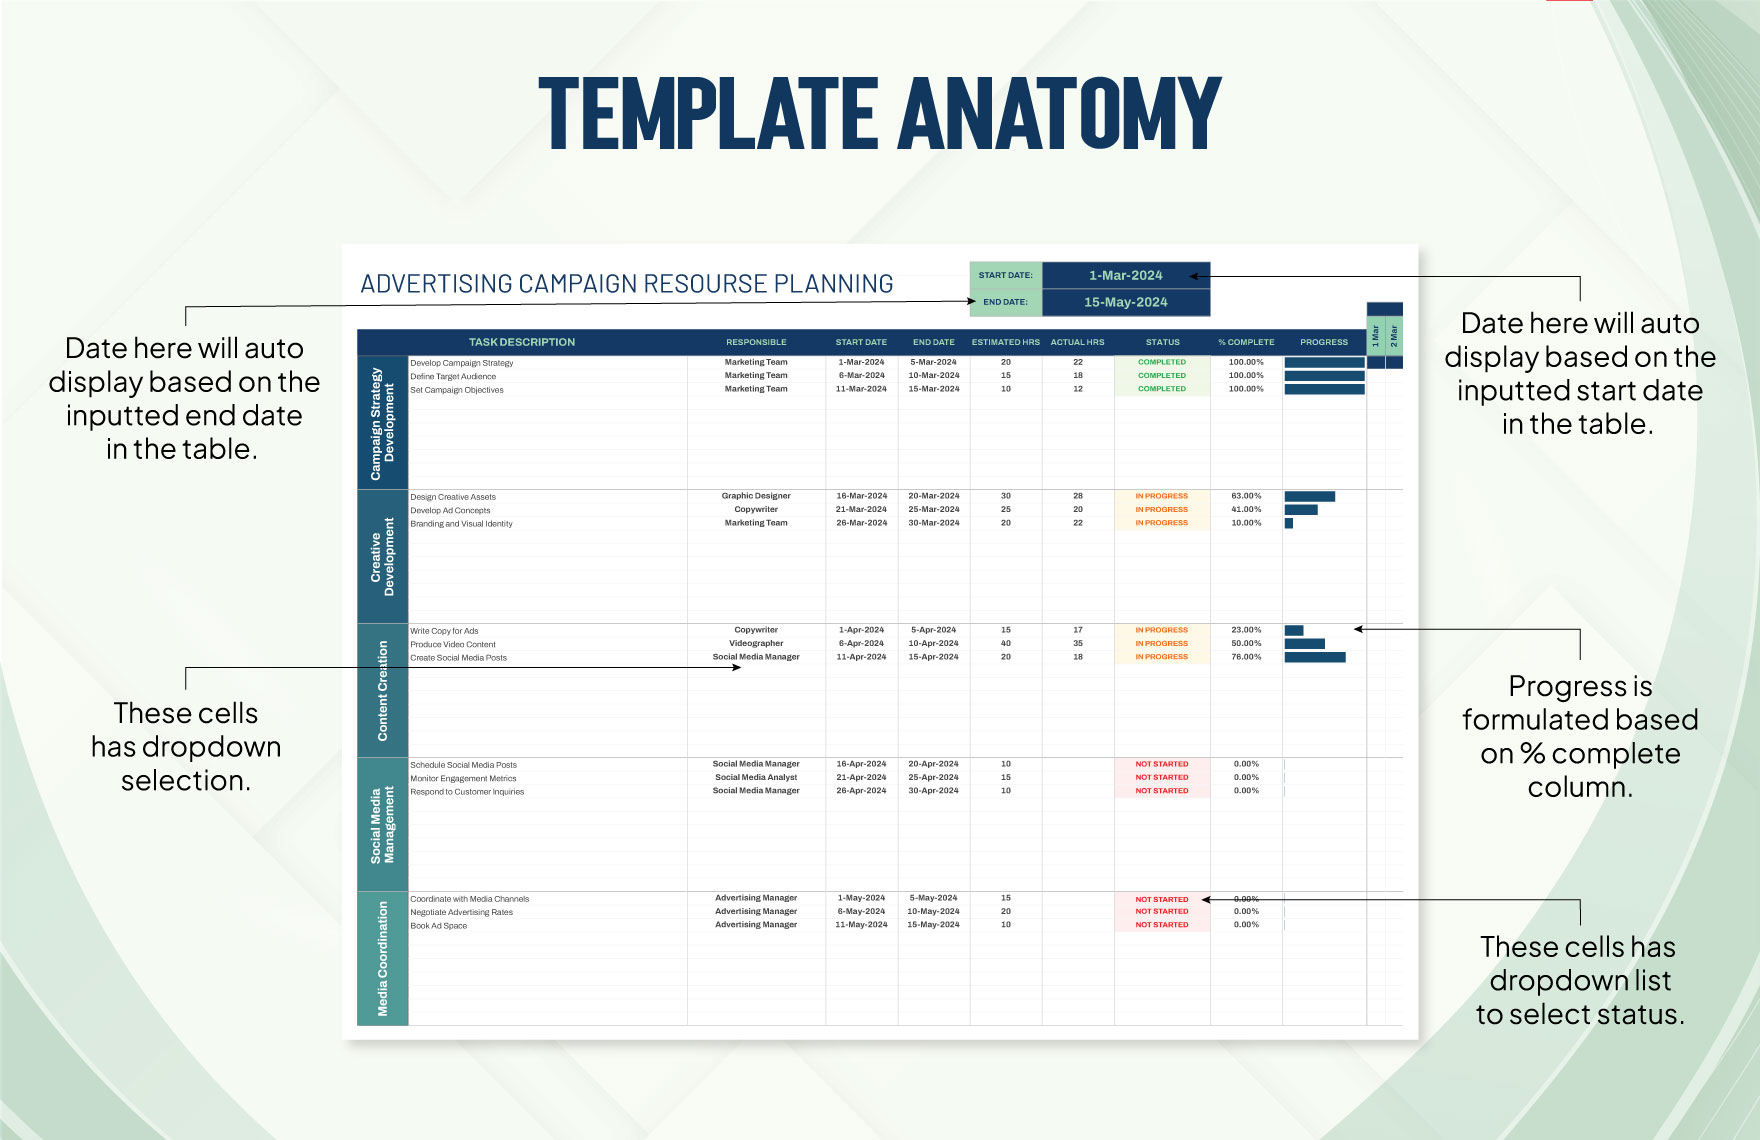 Advertising Campaign Resource Planning Worksheet Template